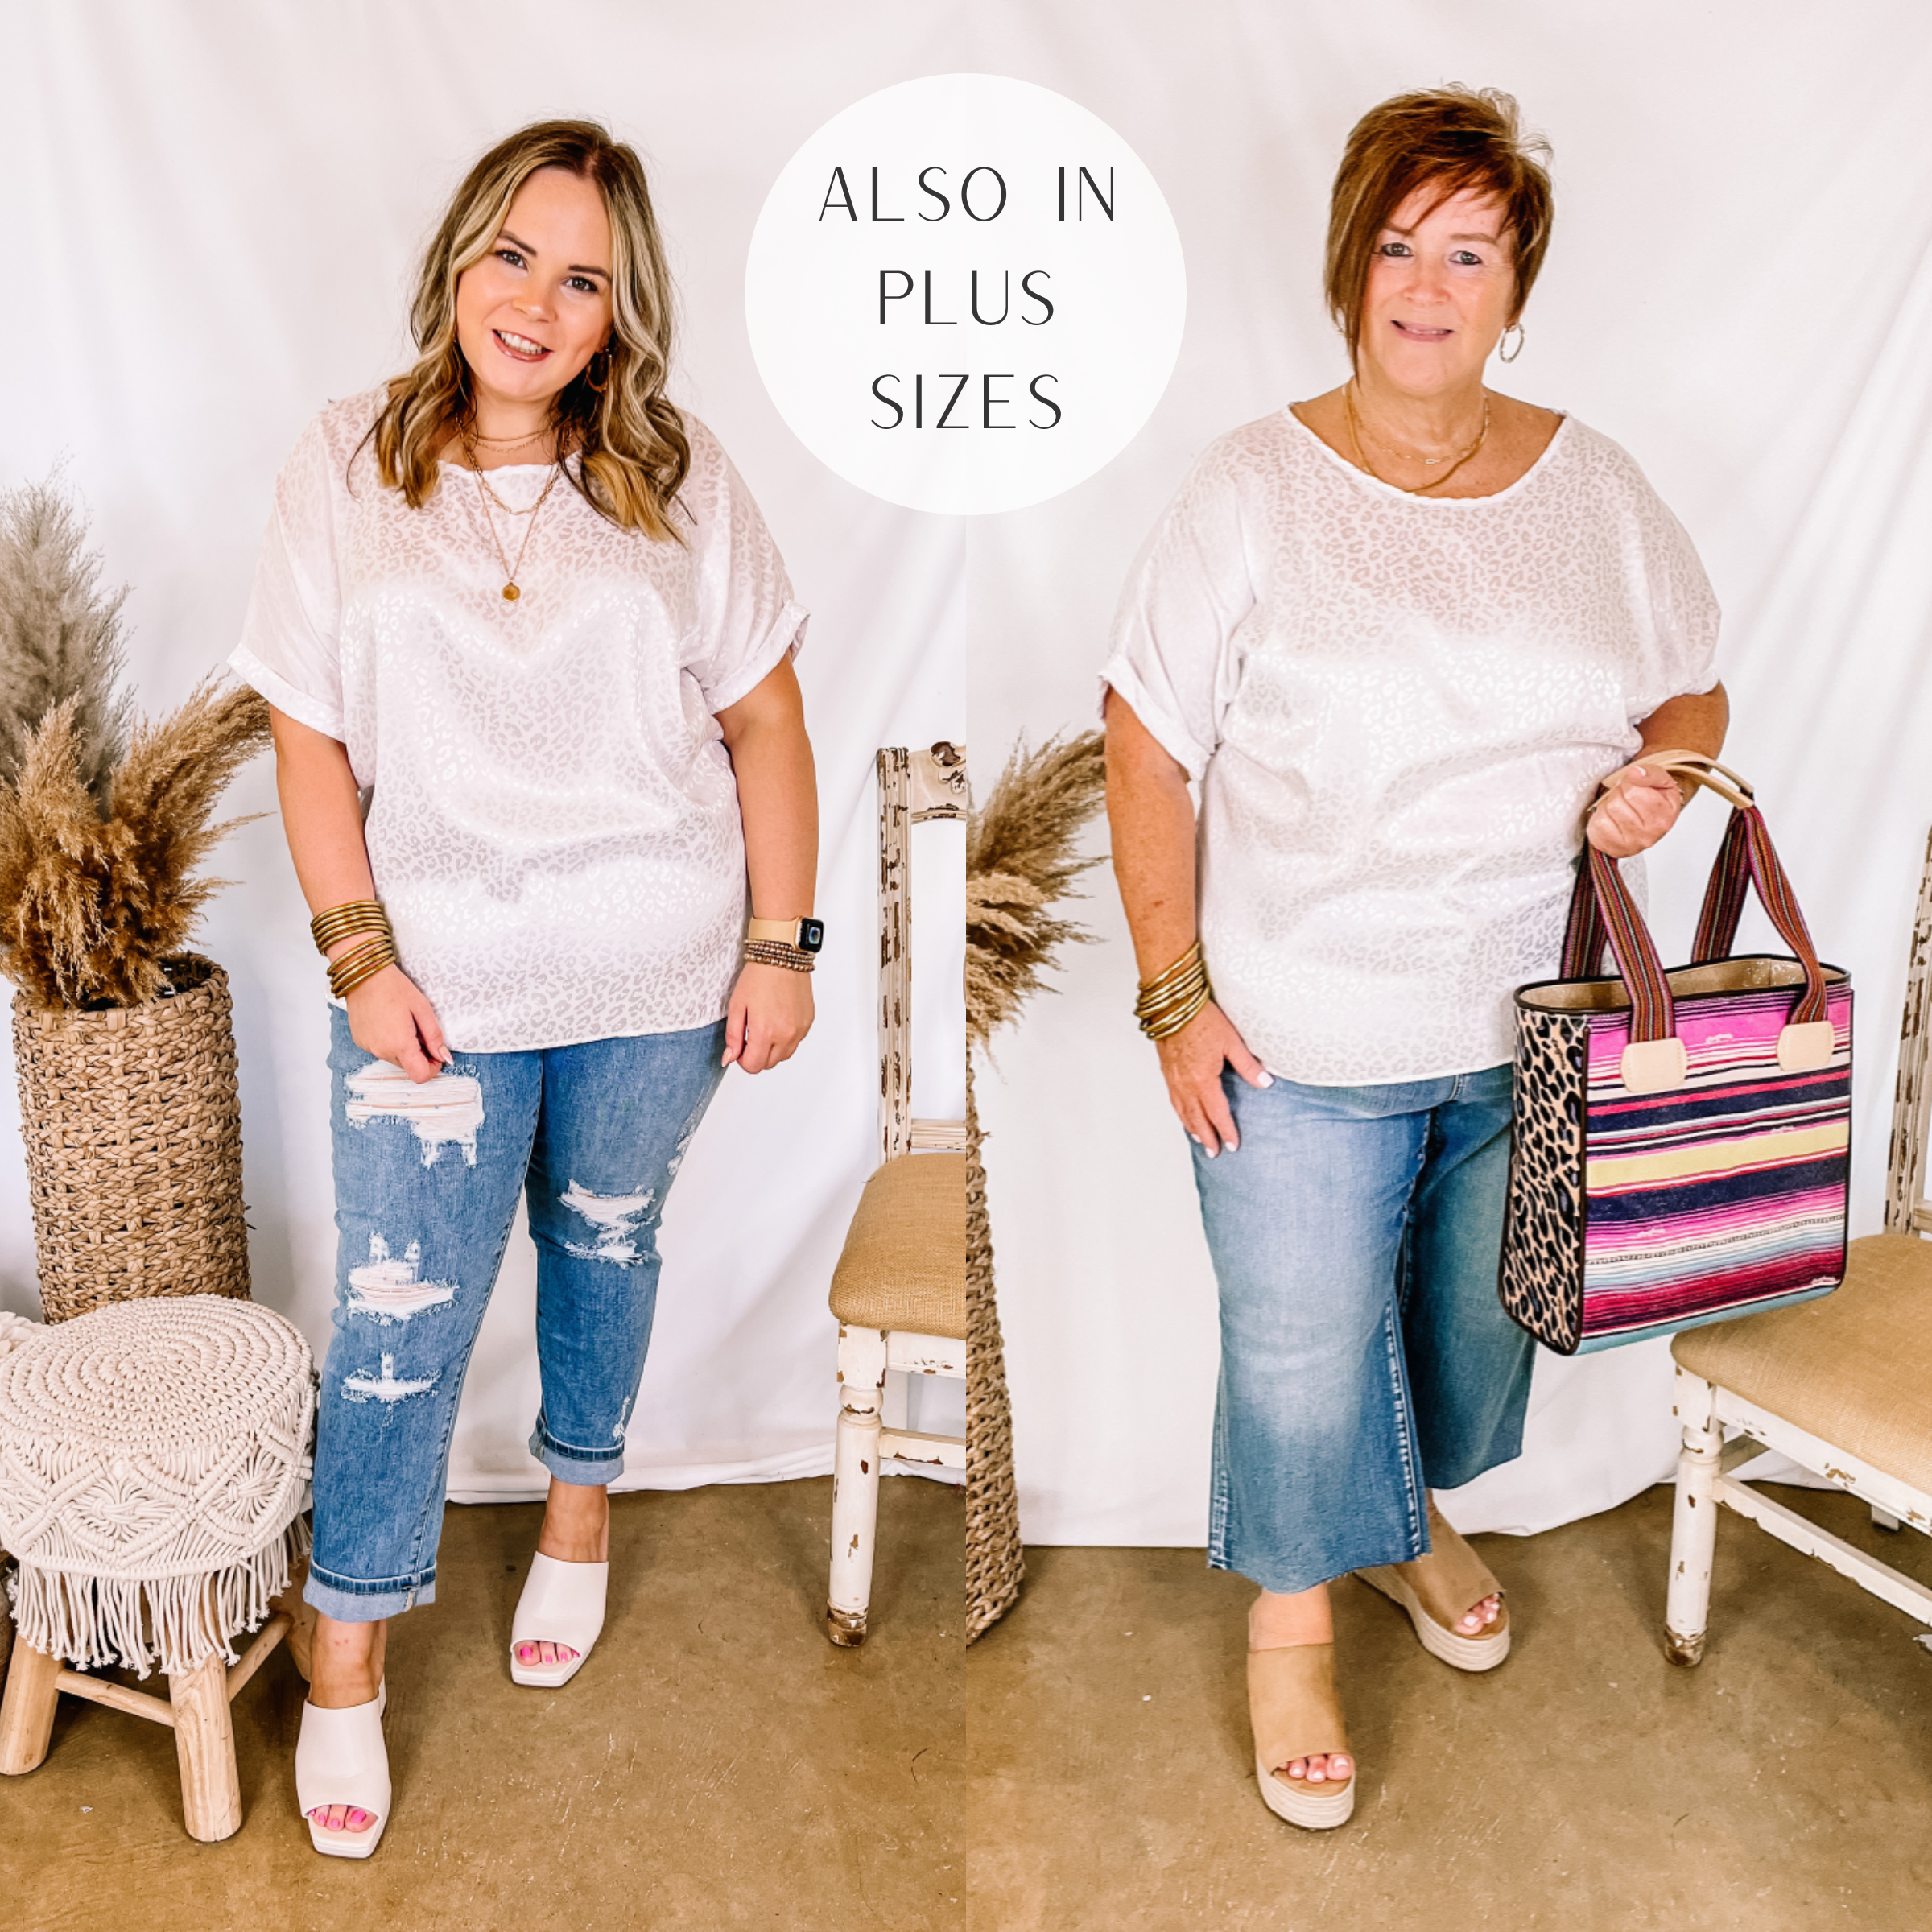 Models are wearing a white satin top that has a shiny leopard print all over. Large Model has this short sleeve top paired with distressed boyfriend jeans, white heels, and gold jewelry. Plus size model has it paired with cropped, wide-leg jeans, tan wedges and gold jewelry.